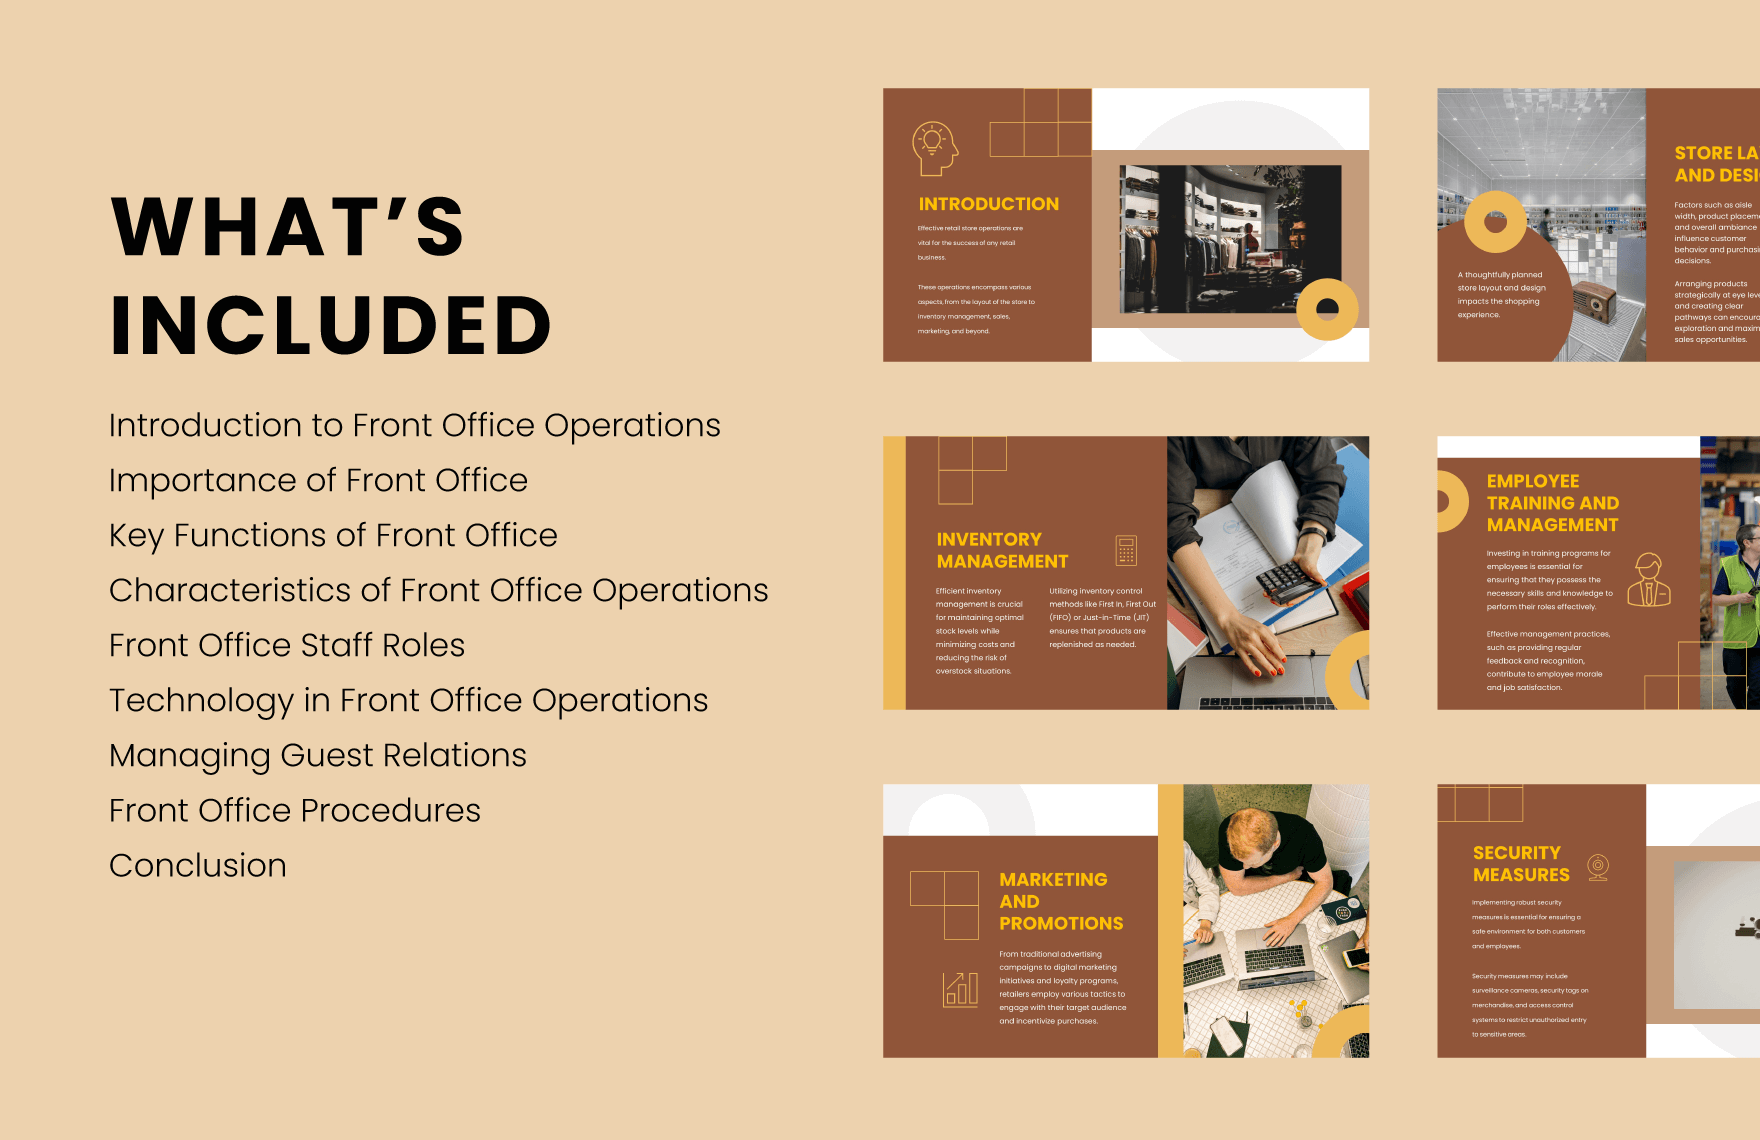 Retail Store Operations PPT Template